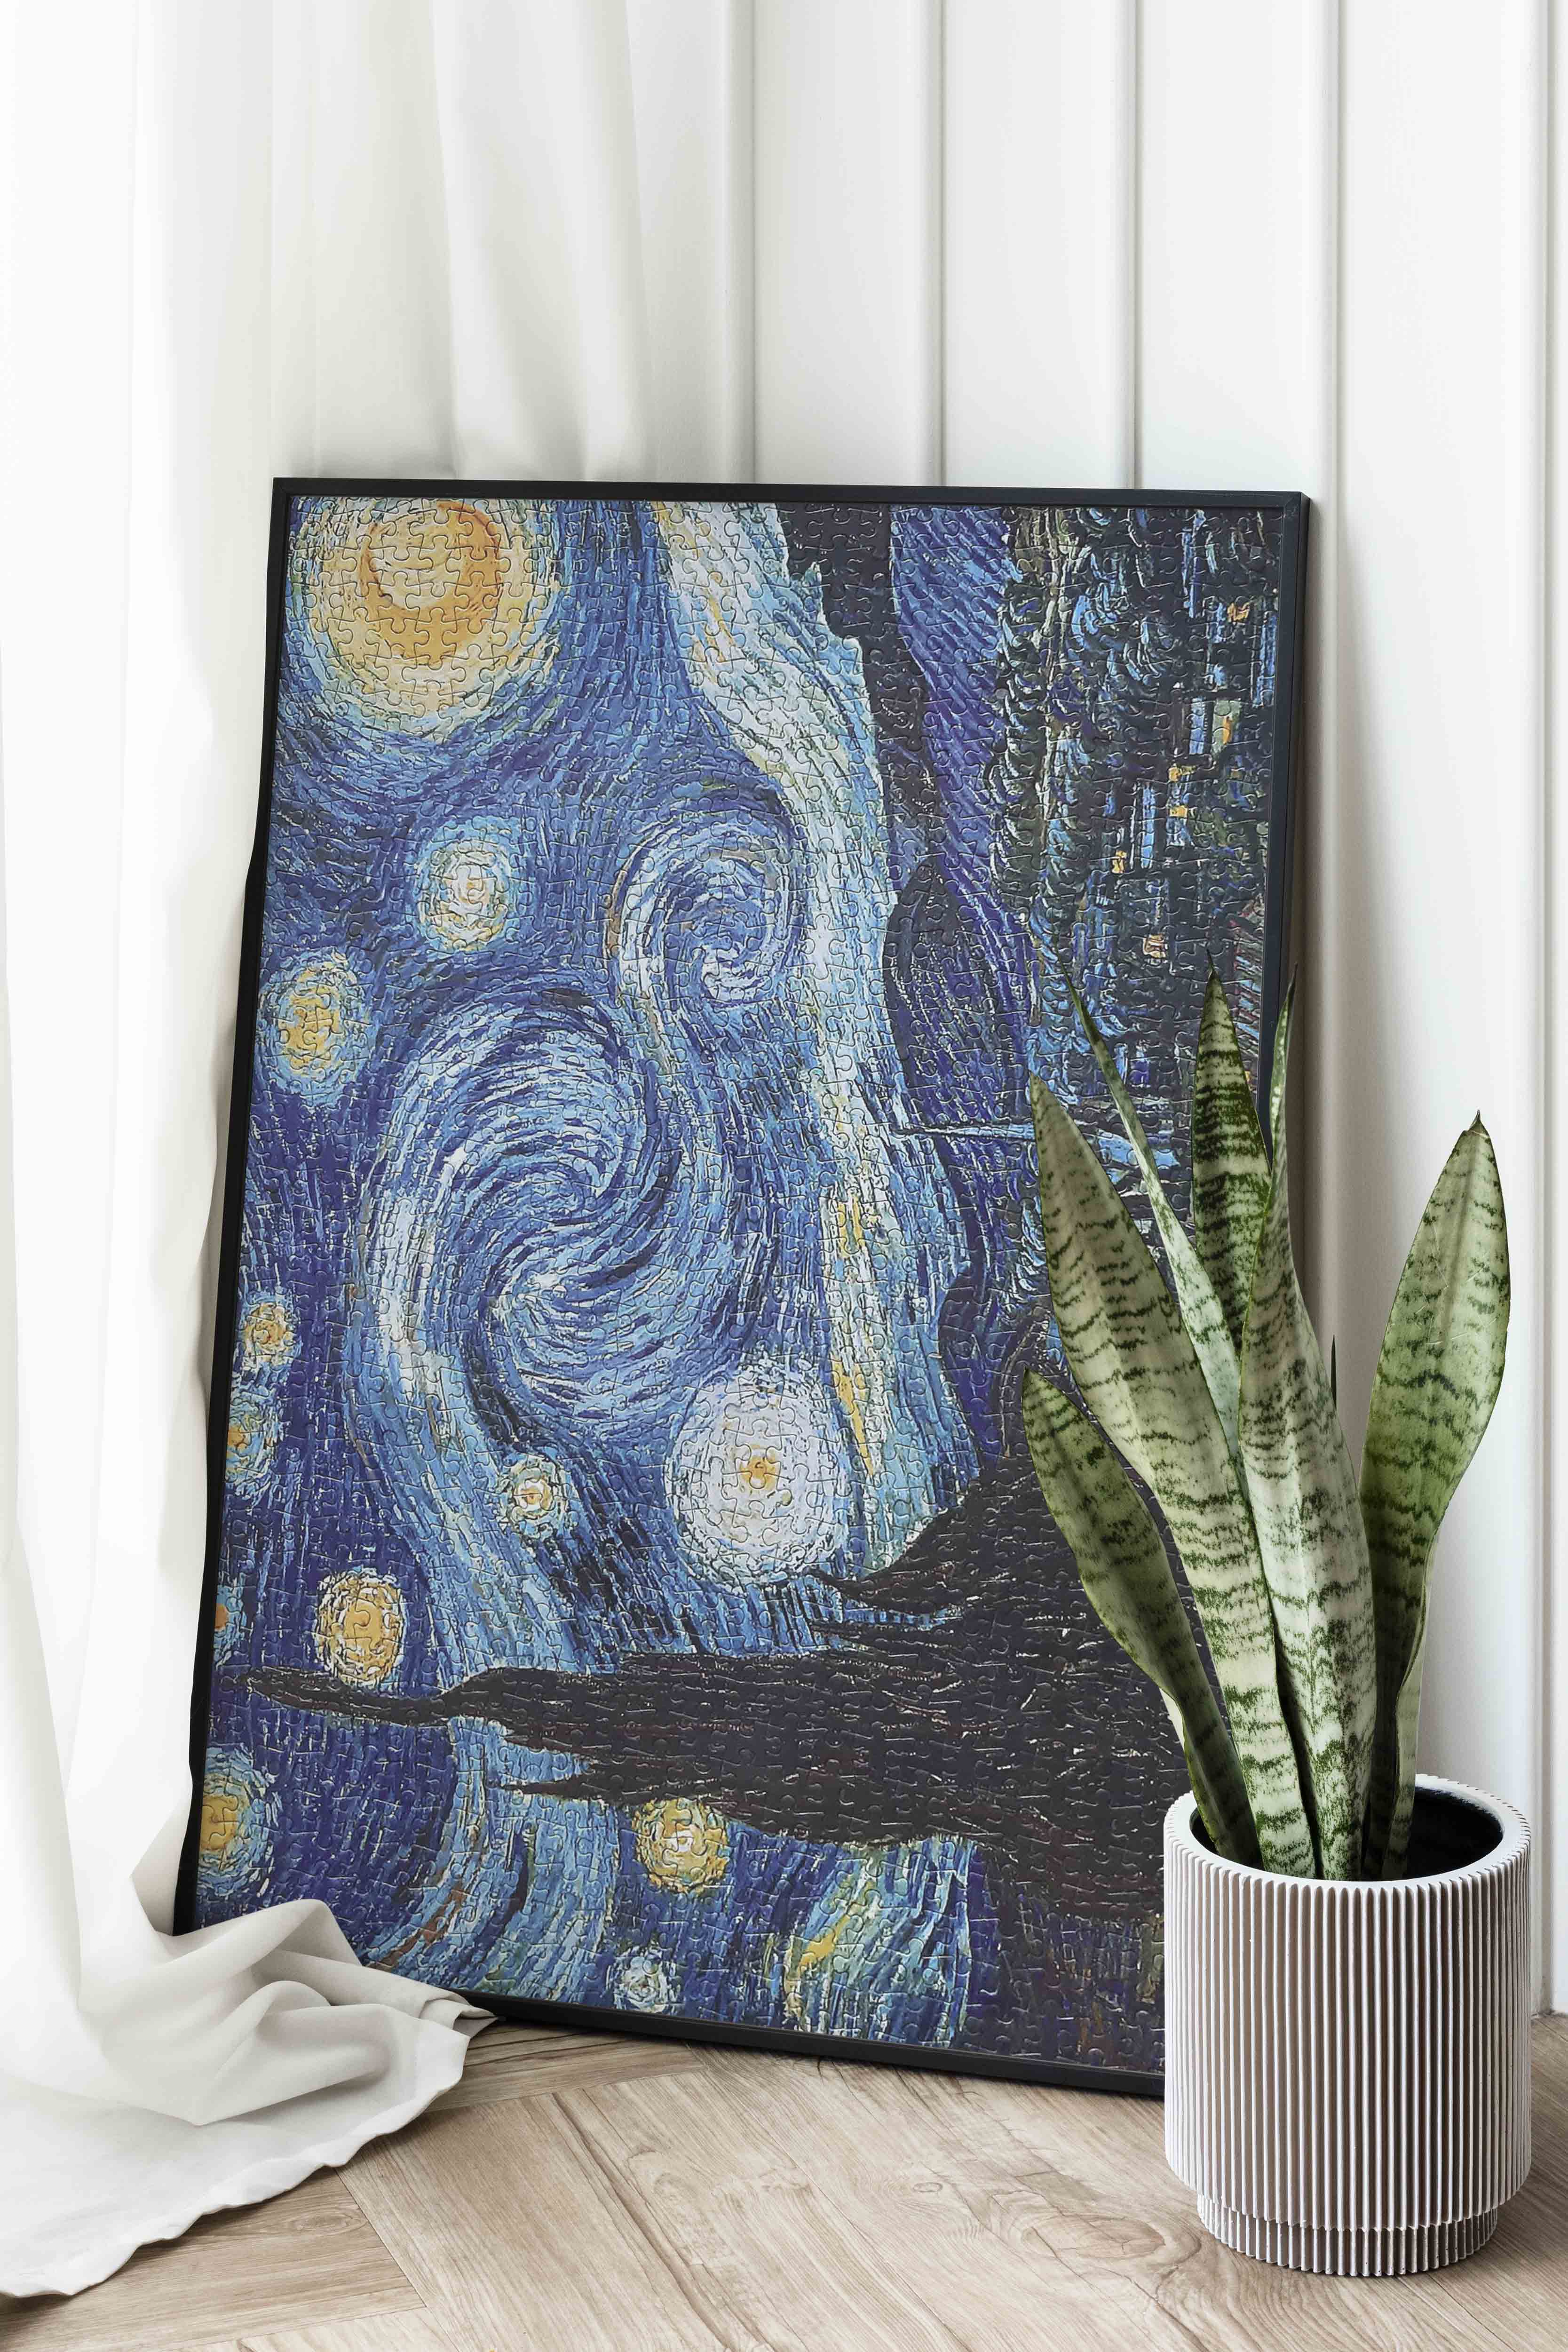 A piece of art: frame your Vincent Van Gogh The Starry Night jigsaw puzzle once complete for beautiful wall art.